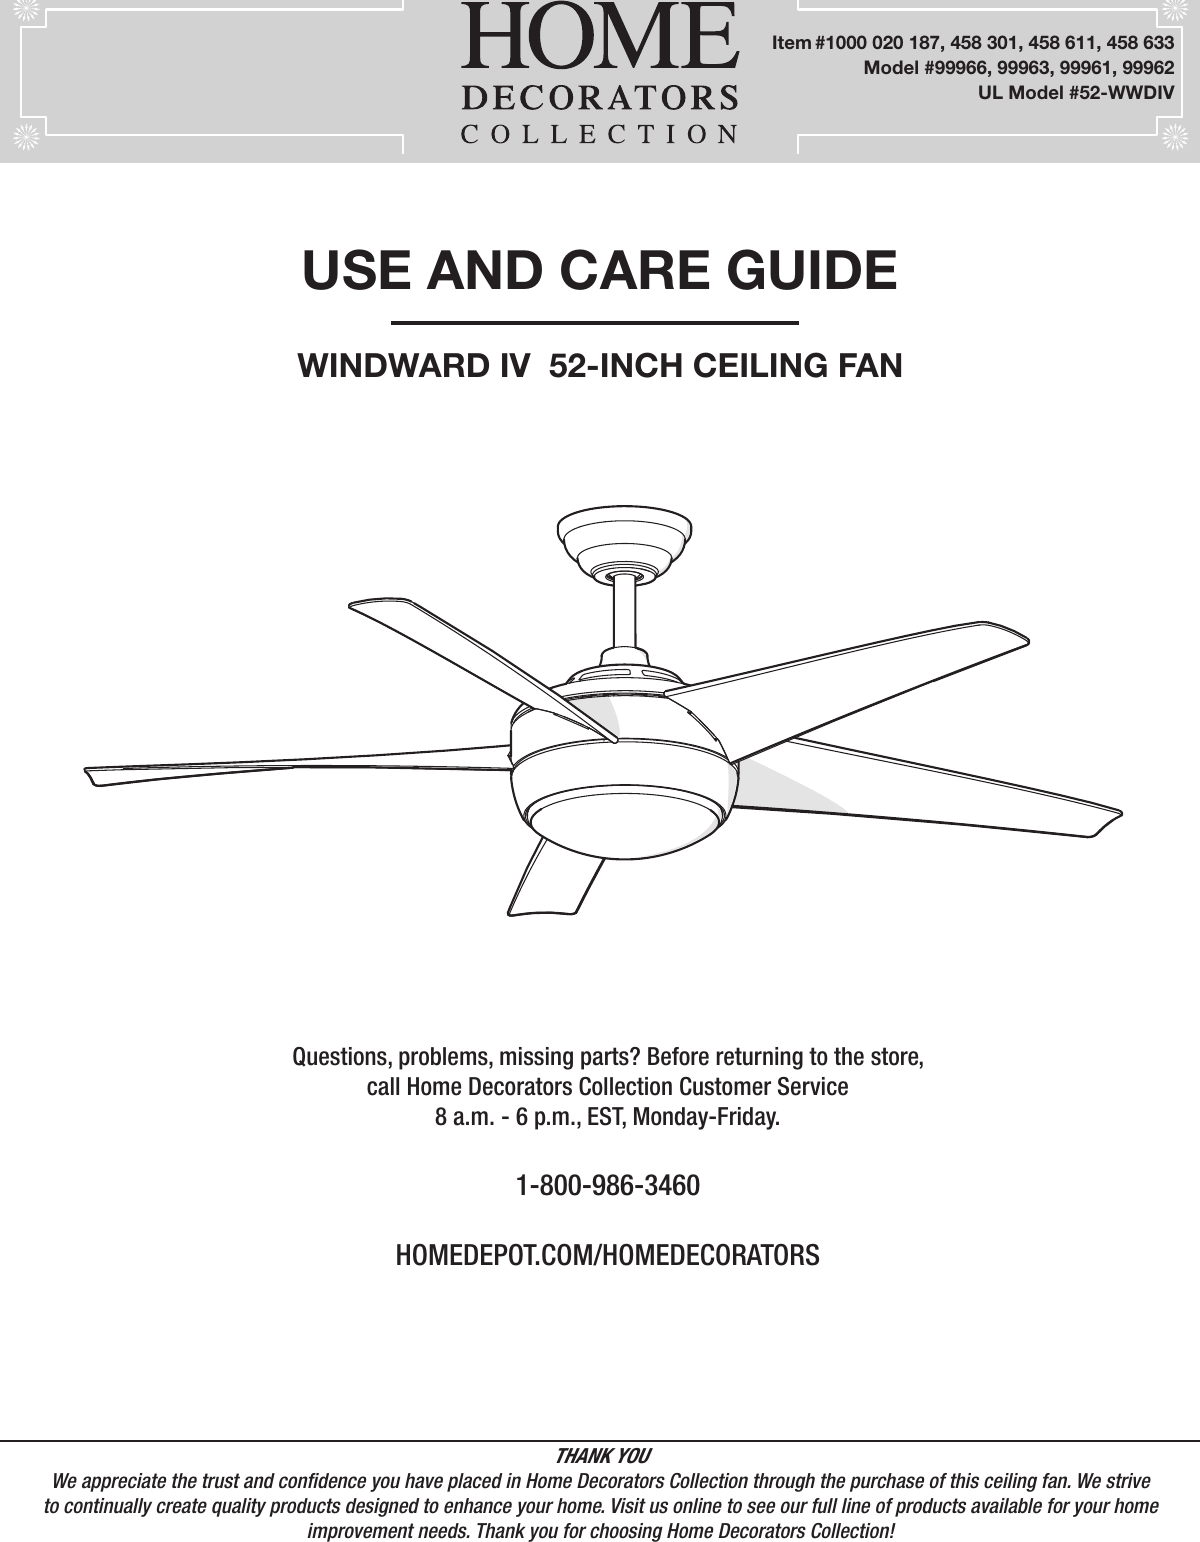 USE AND CARE GUIDEWINDWARD IV  52-INCH CEILING FANQuestions, problems, missing parts? Before returning to the store,call Home Decorators Collection Customer Service8 a.m. - 6 p.m., EST, Monday-Friday.1-800-986-3460HOMEDEPOT.COM/HOMEDECORATORSTHANK YOUWe appreciate the trust and condence you have placed in Home Decorators Collection through the purchase of this ceiling fan. We strive to continually create quality products designed to enhance your home. Visit us online to see our full line of products available for your home improvement needs. Thank you for choosing Home Decorators Collection!Item #1000 020 187, 458 301, 458 611, 458 633      Model #99966, 99963, 99961, 99962UL Model #52-WWDIV